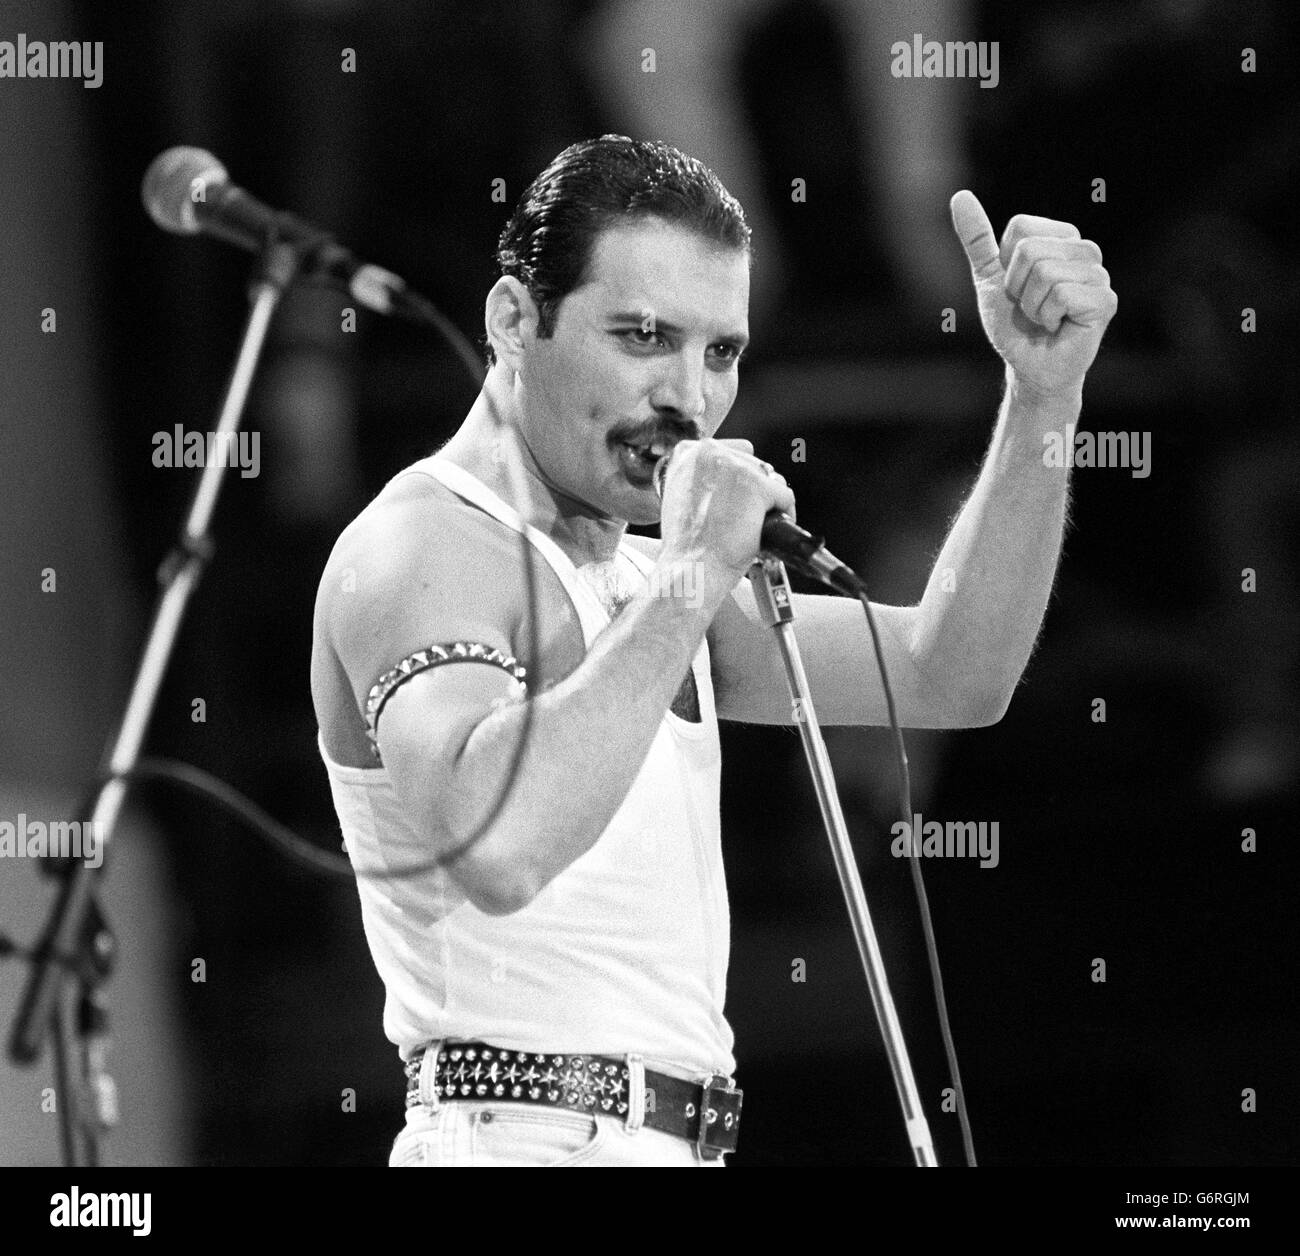 Freddie Mercury, of the pop band Queen, performing on stage during the Live Aid concert. Stock Photo